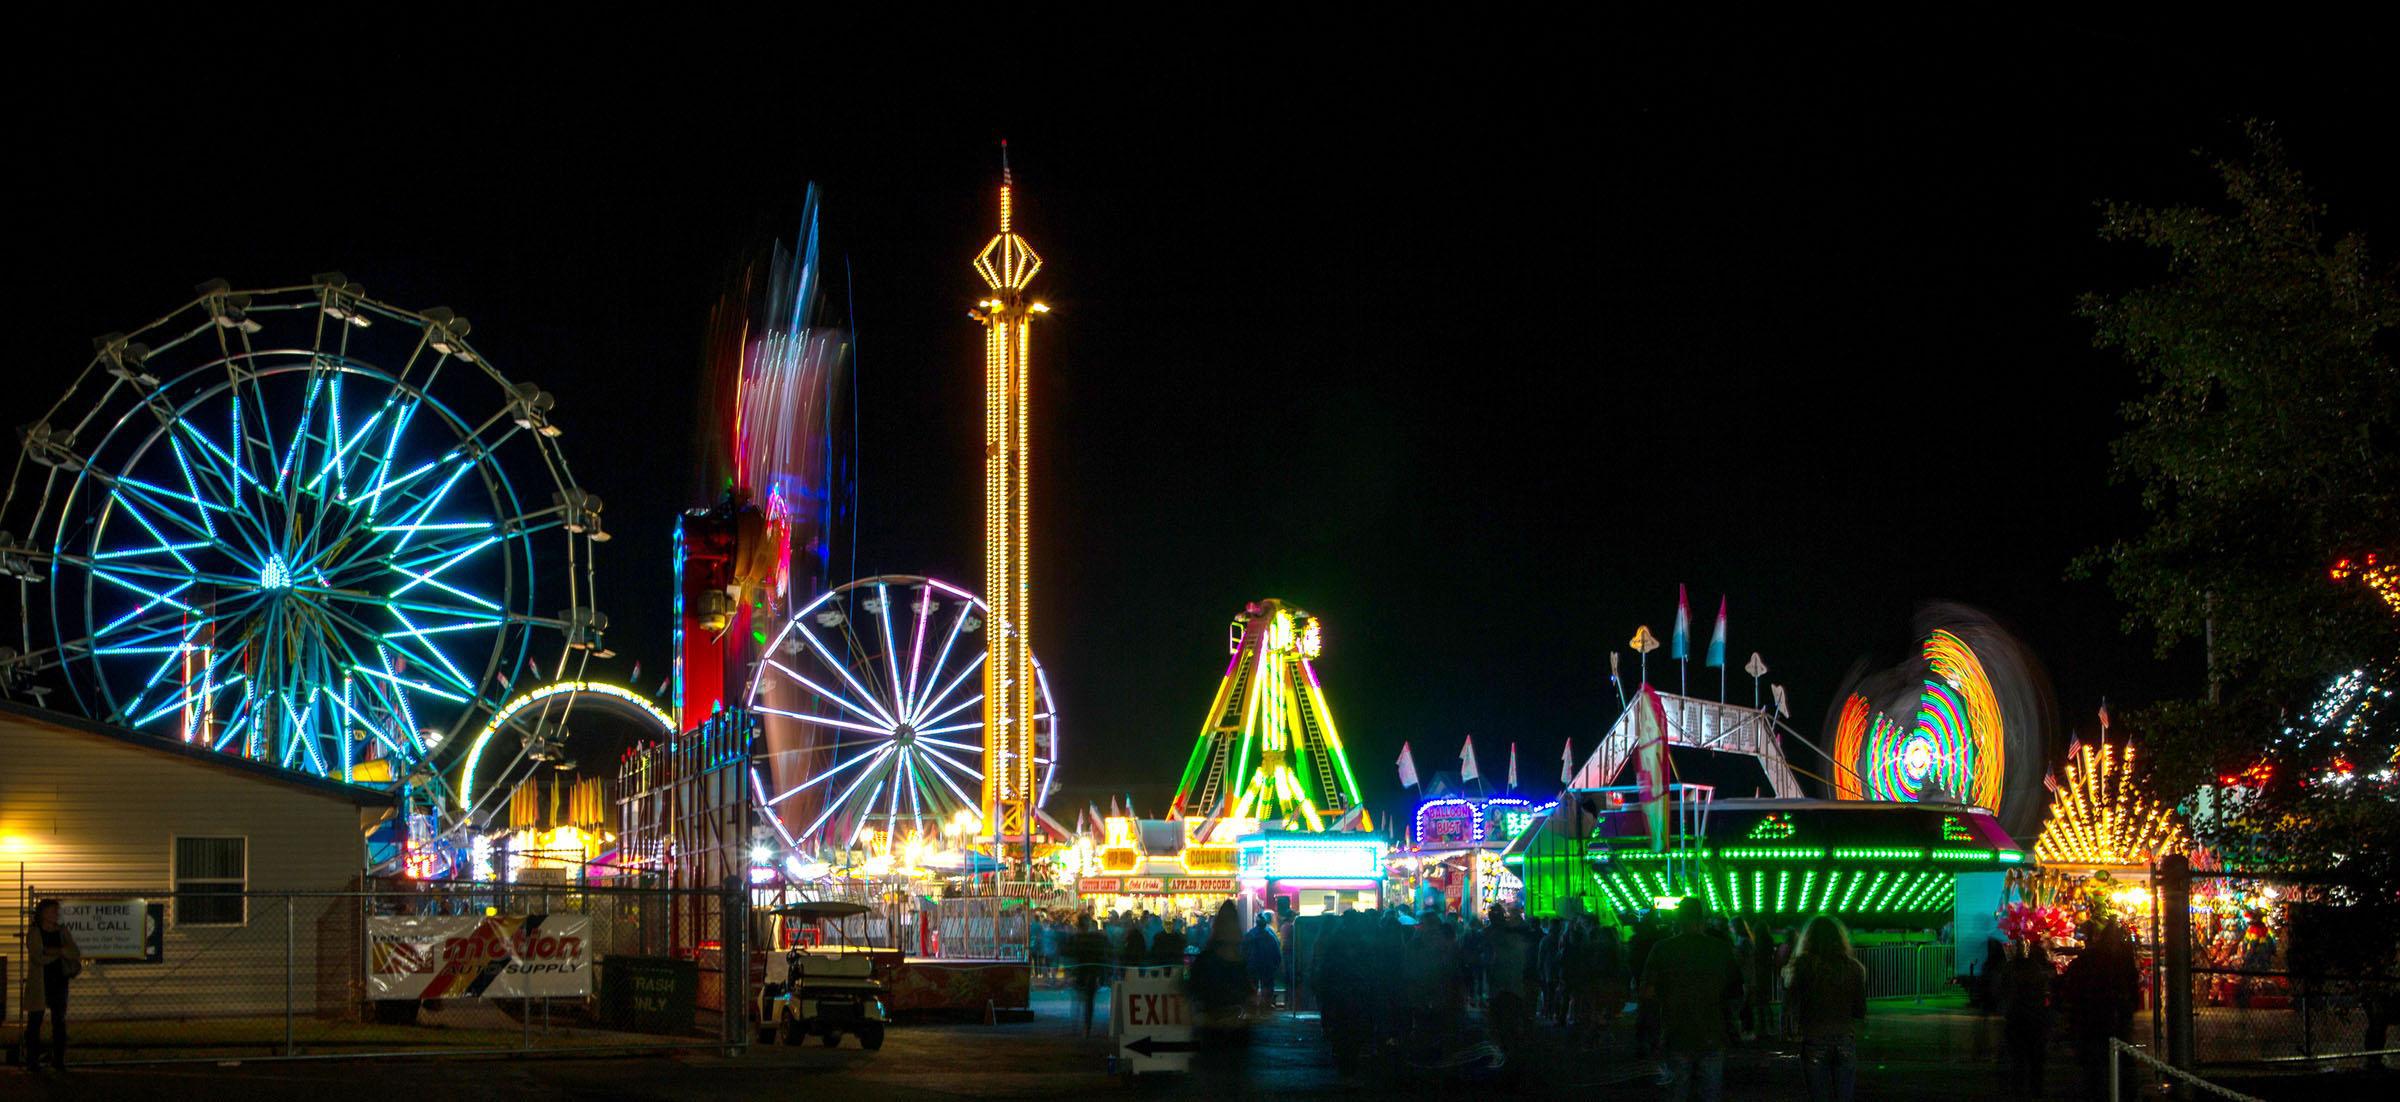 Its Not Too Late 🕐 To Visit the Fair 🎡